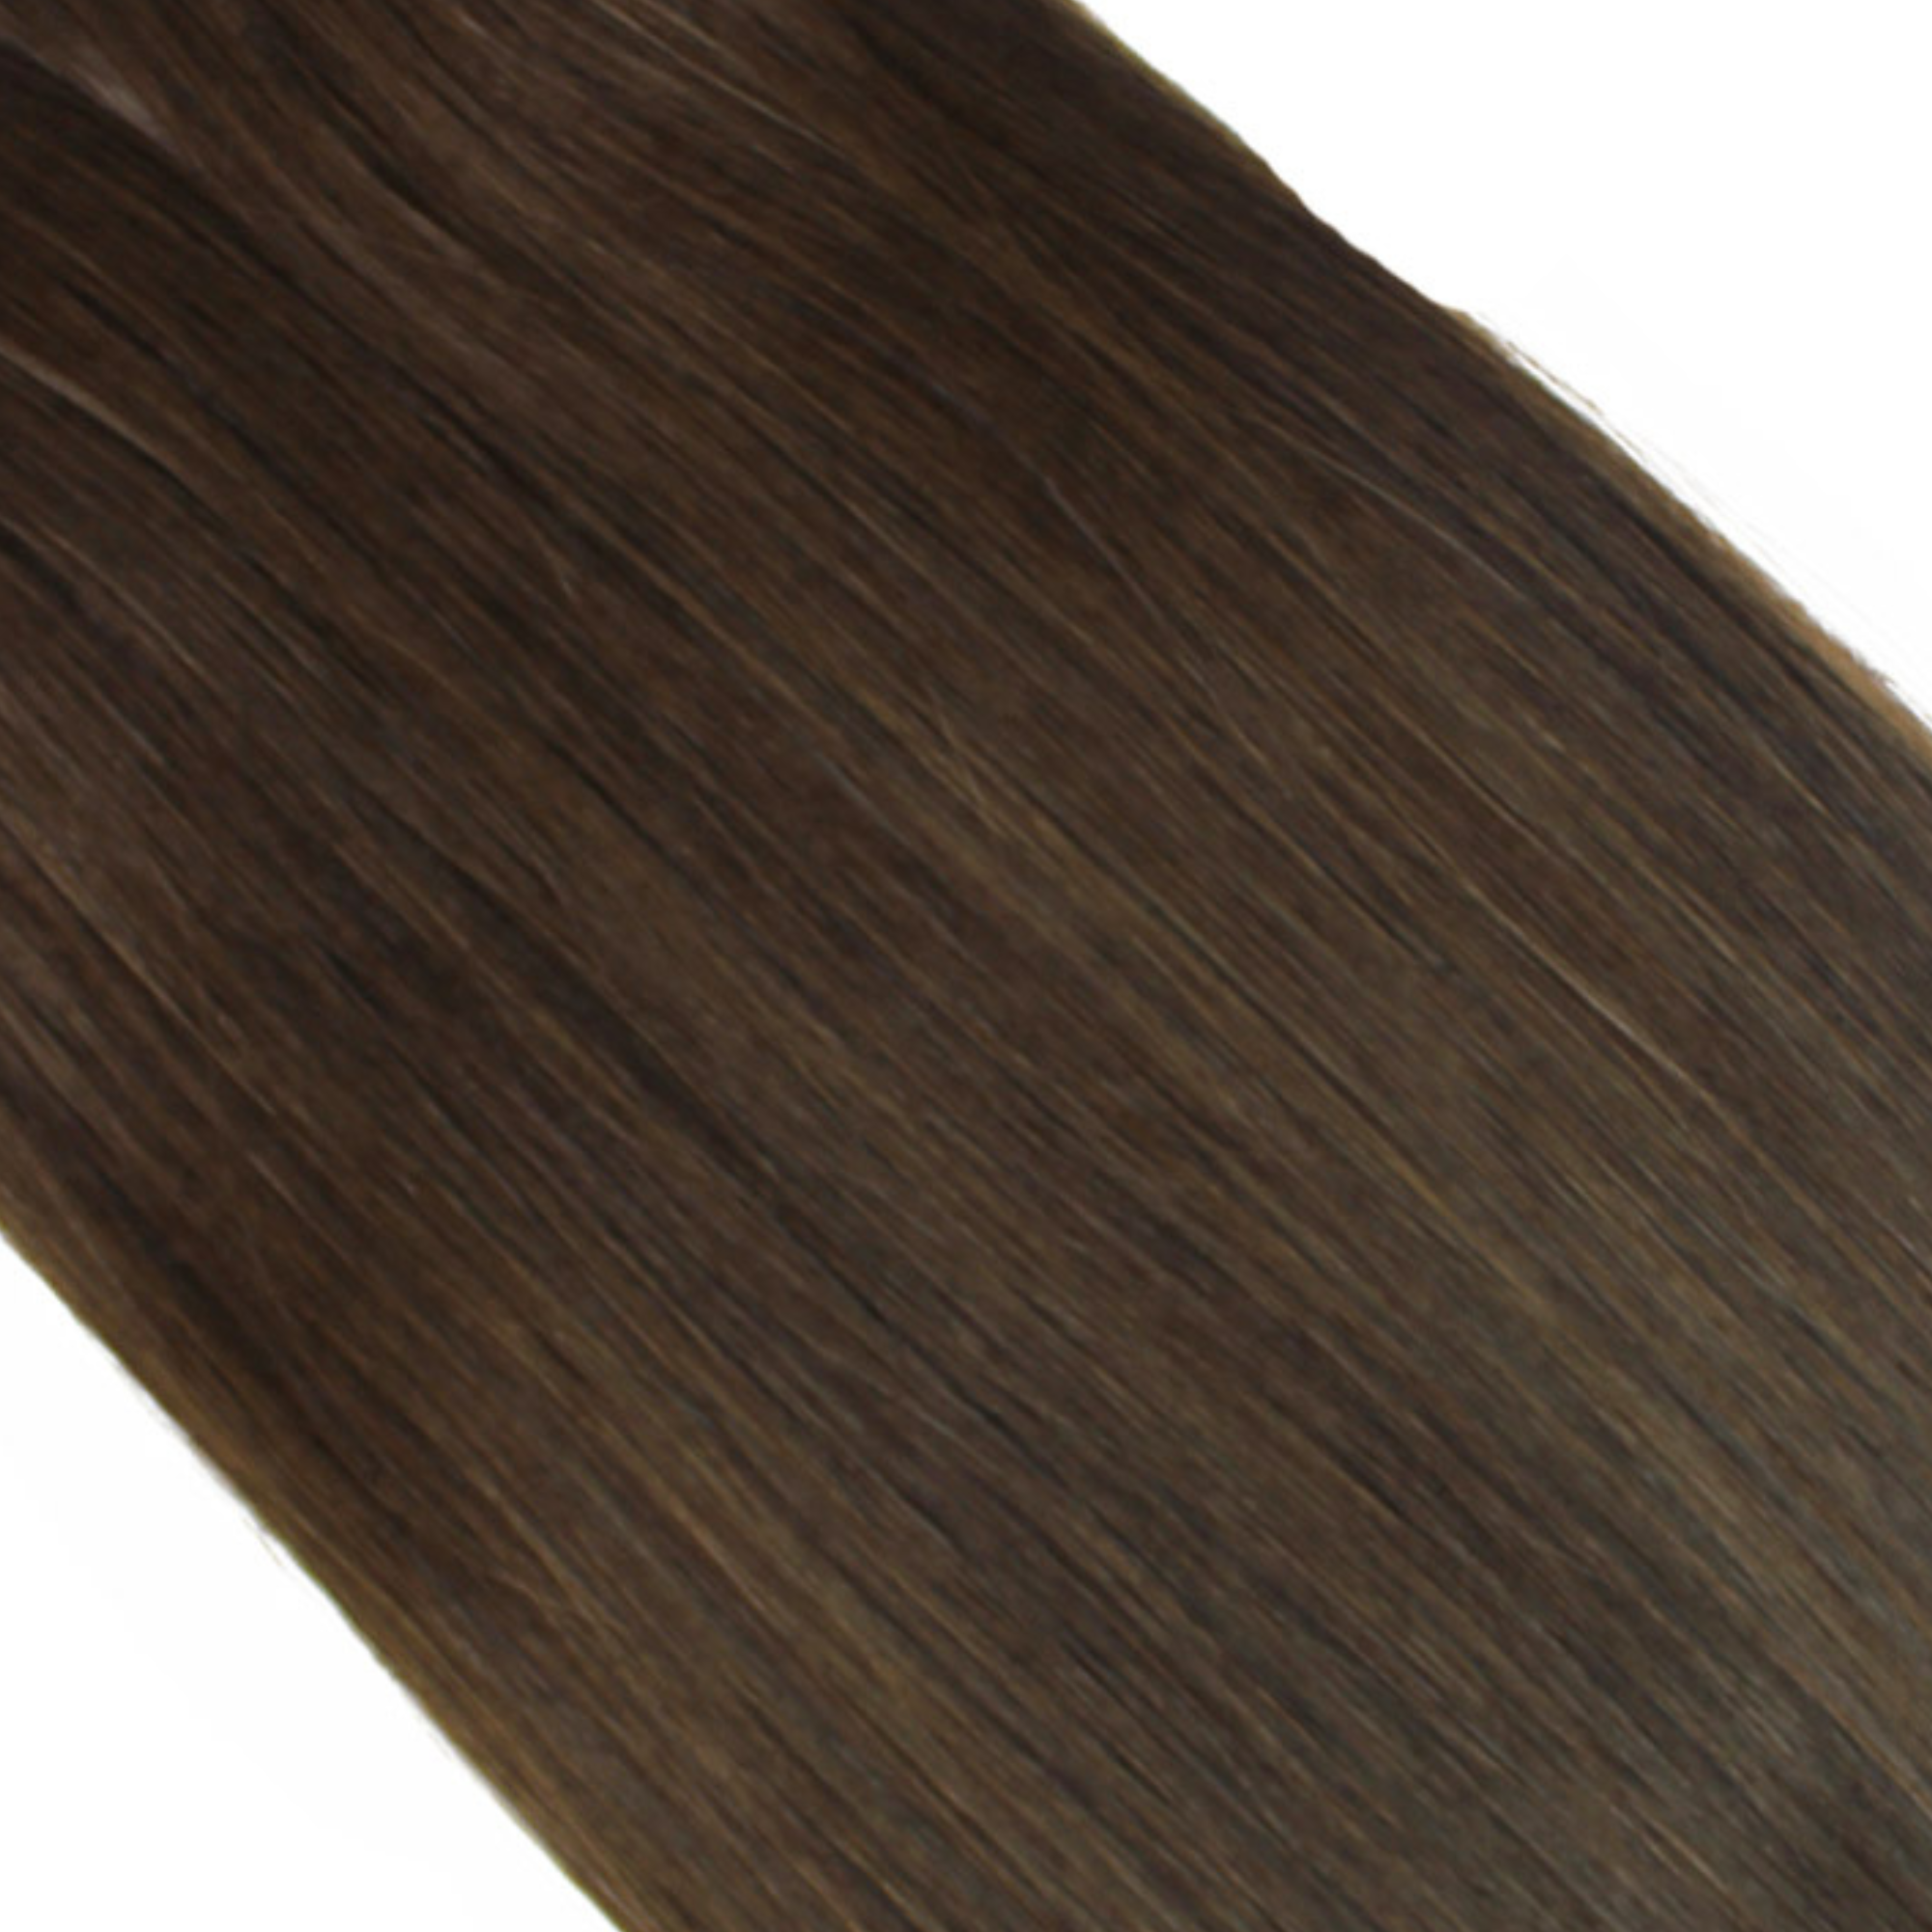 "hair rehab london 24" length 280 grams weight ultimate clip-in hair extensions shade titled paparazzi perfect"